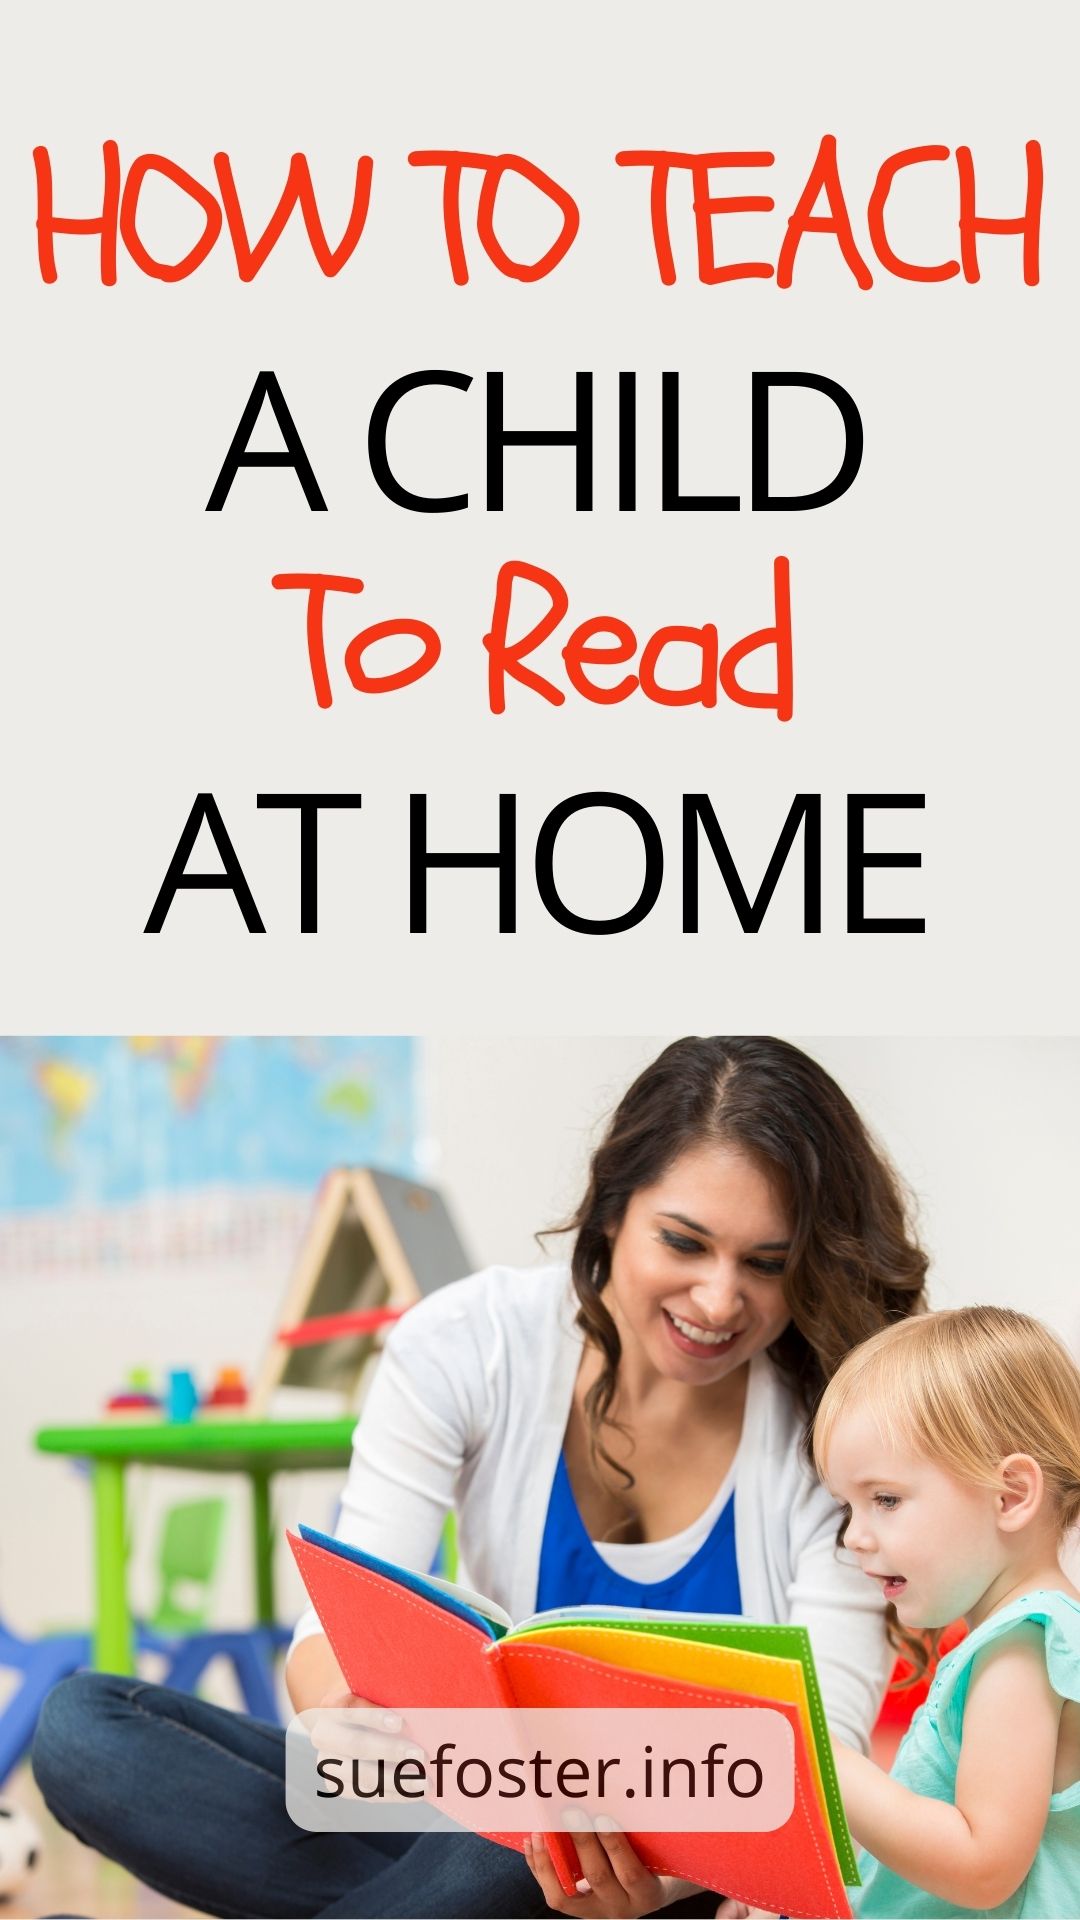 This post covers how to teach your child to read at home, along with tips on how to help them learn to count.